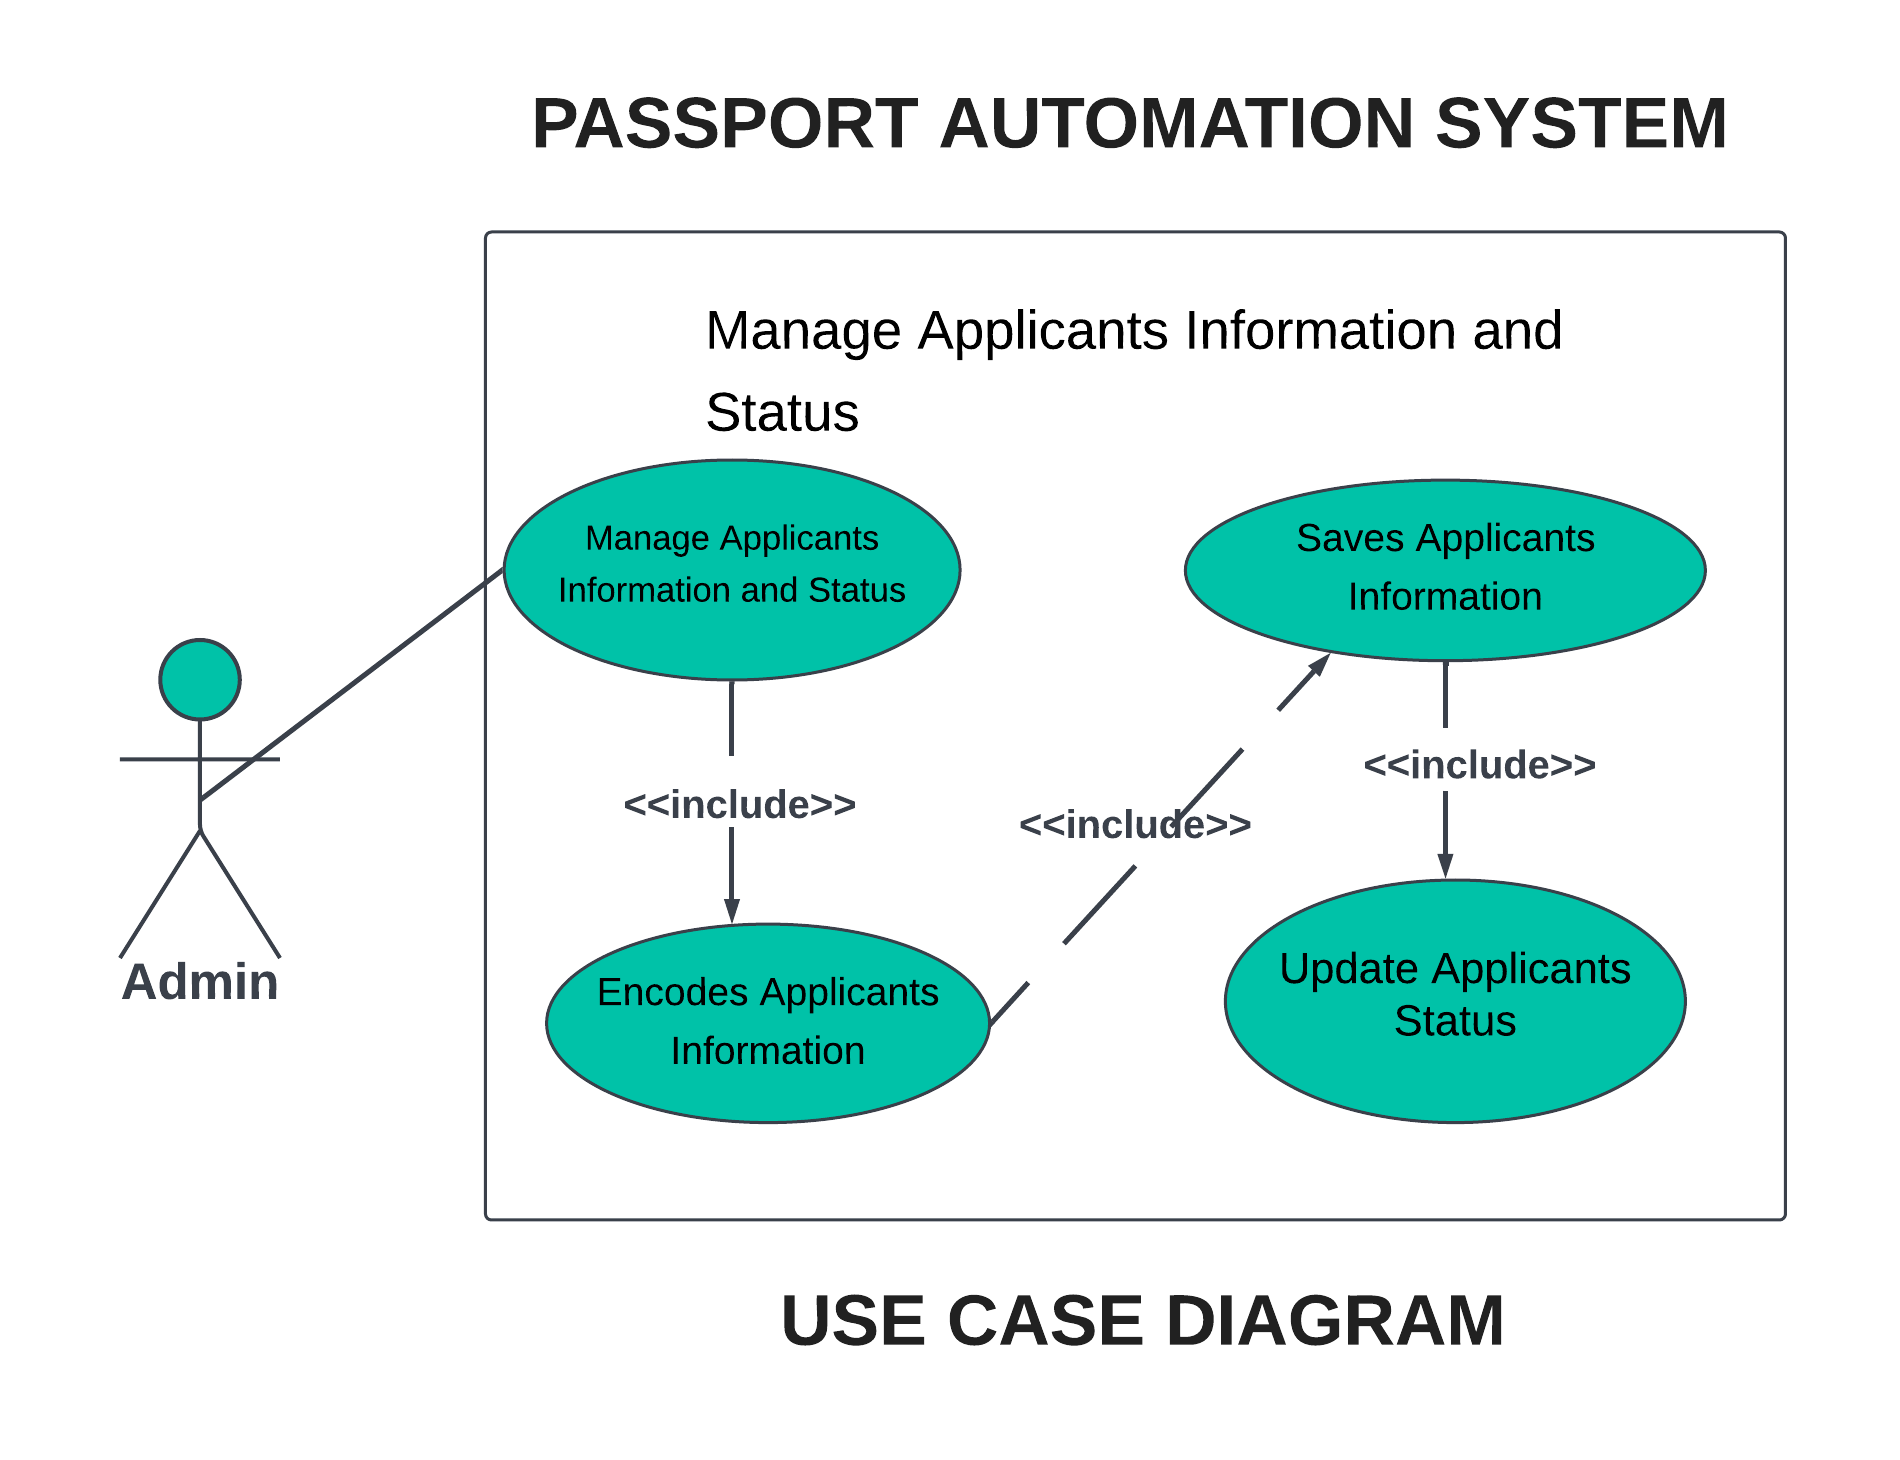 MANAGE APPLICANTS INFO AND STATUS USE CASE DIAGRAM